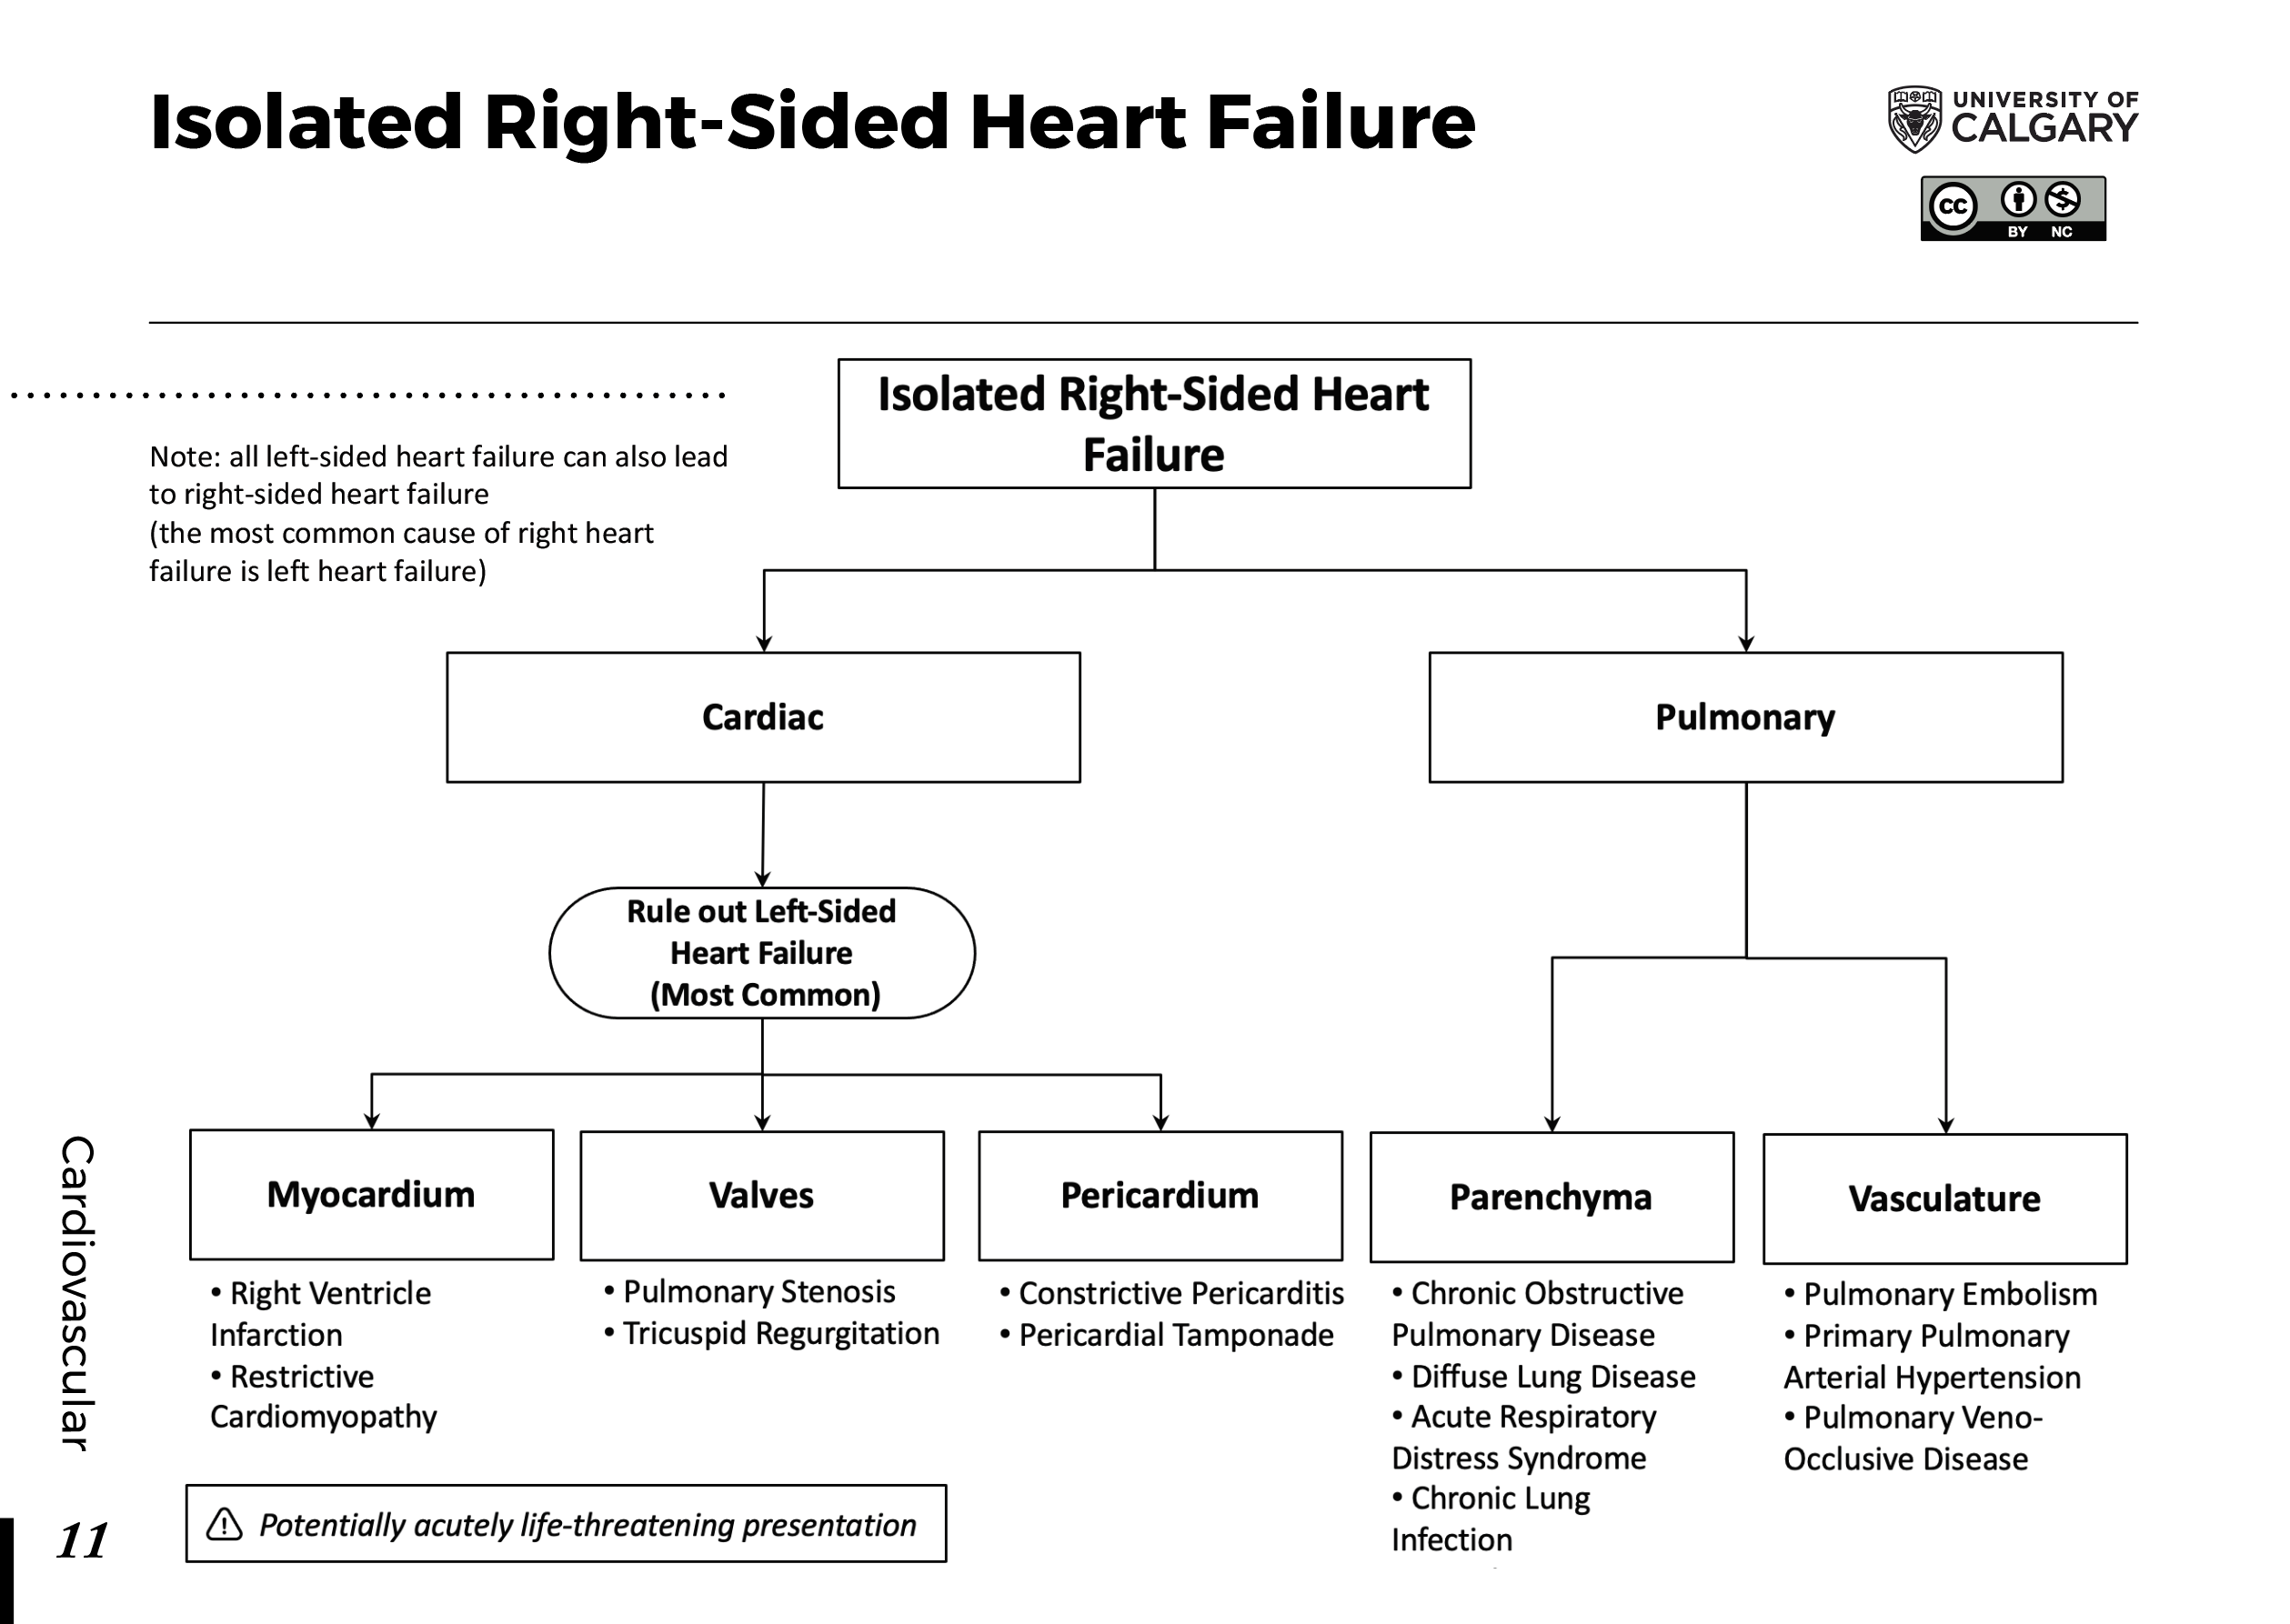 ISOLATED RIGHT-SIDED HEART FAILURE Scheme